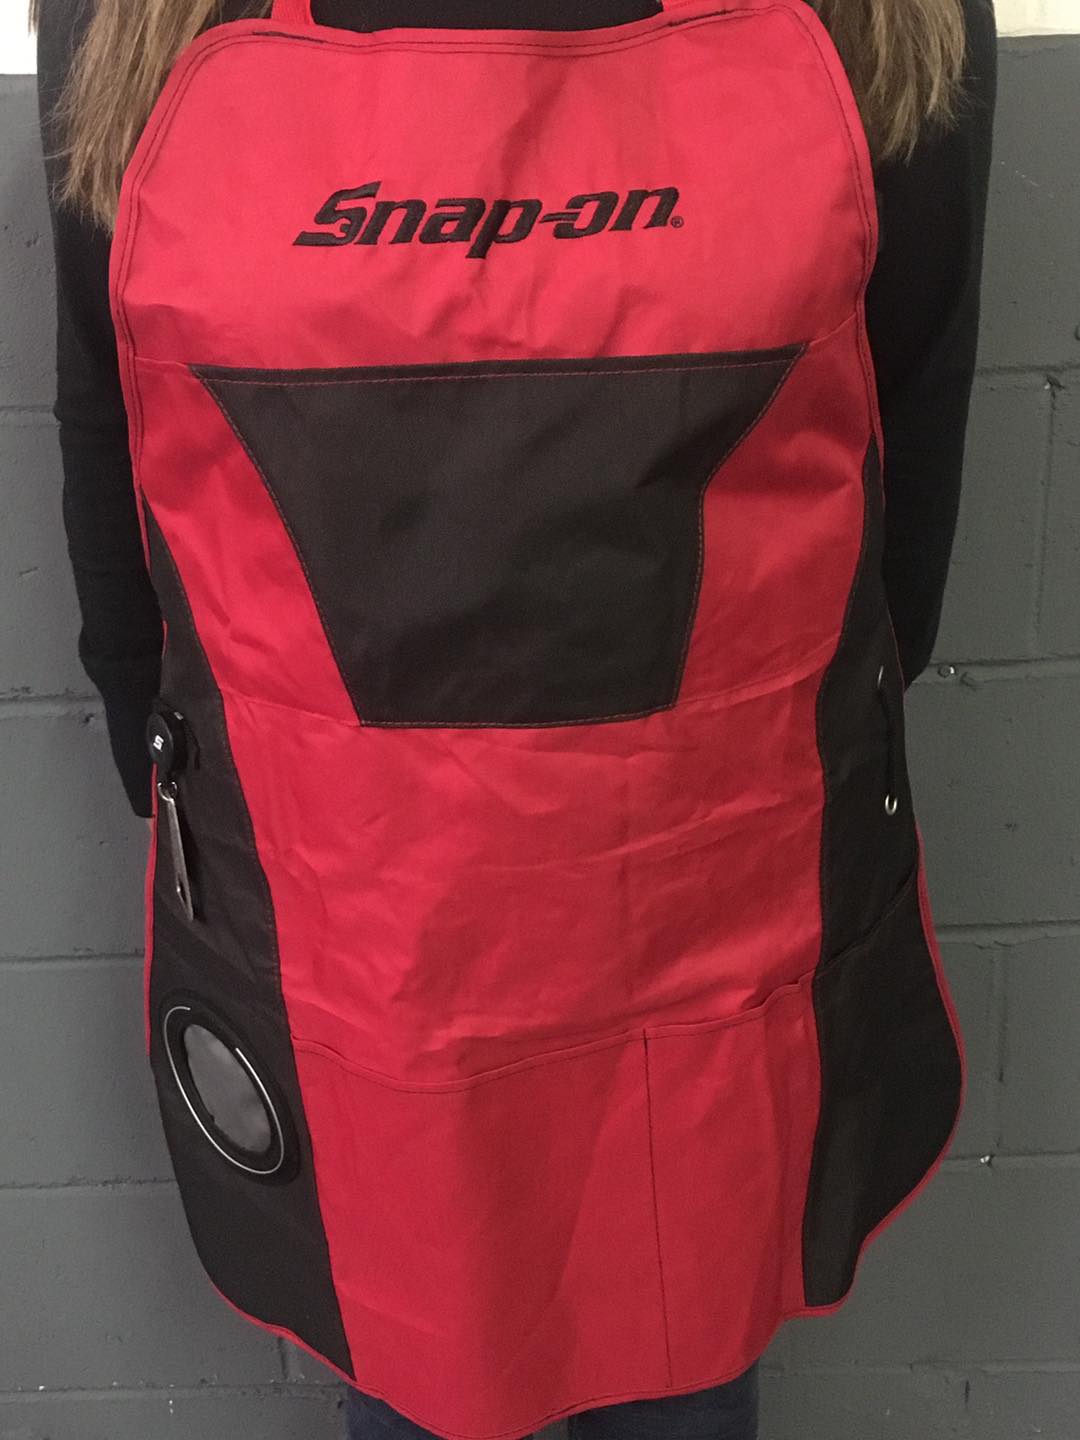 NEW Snap-on Grilling Apron Snap-On Apron Brand New in Package 